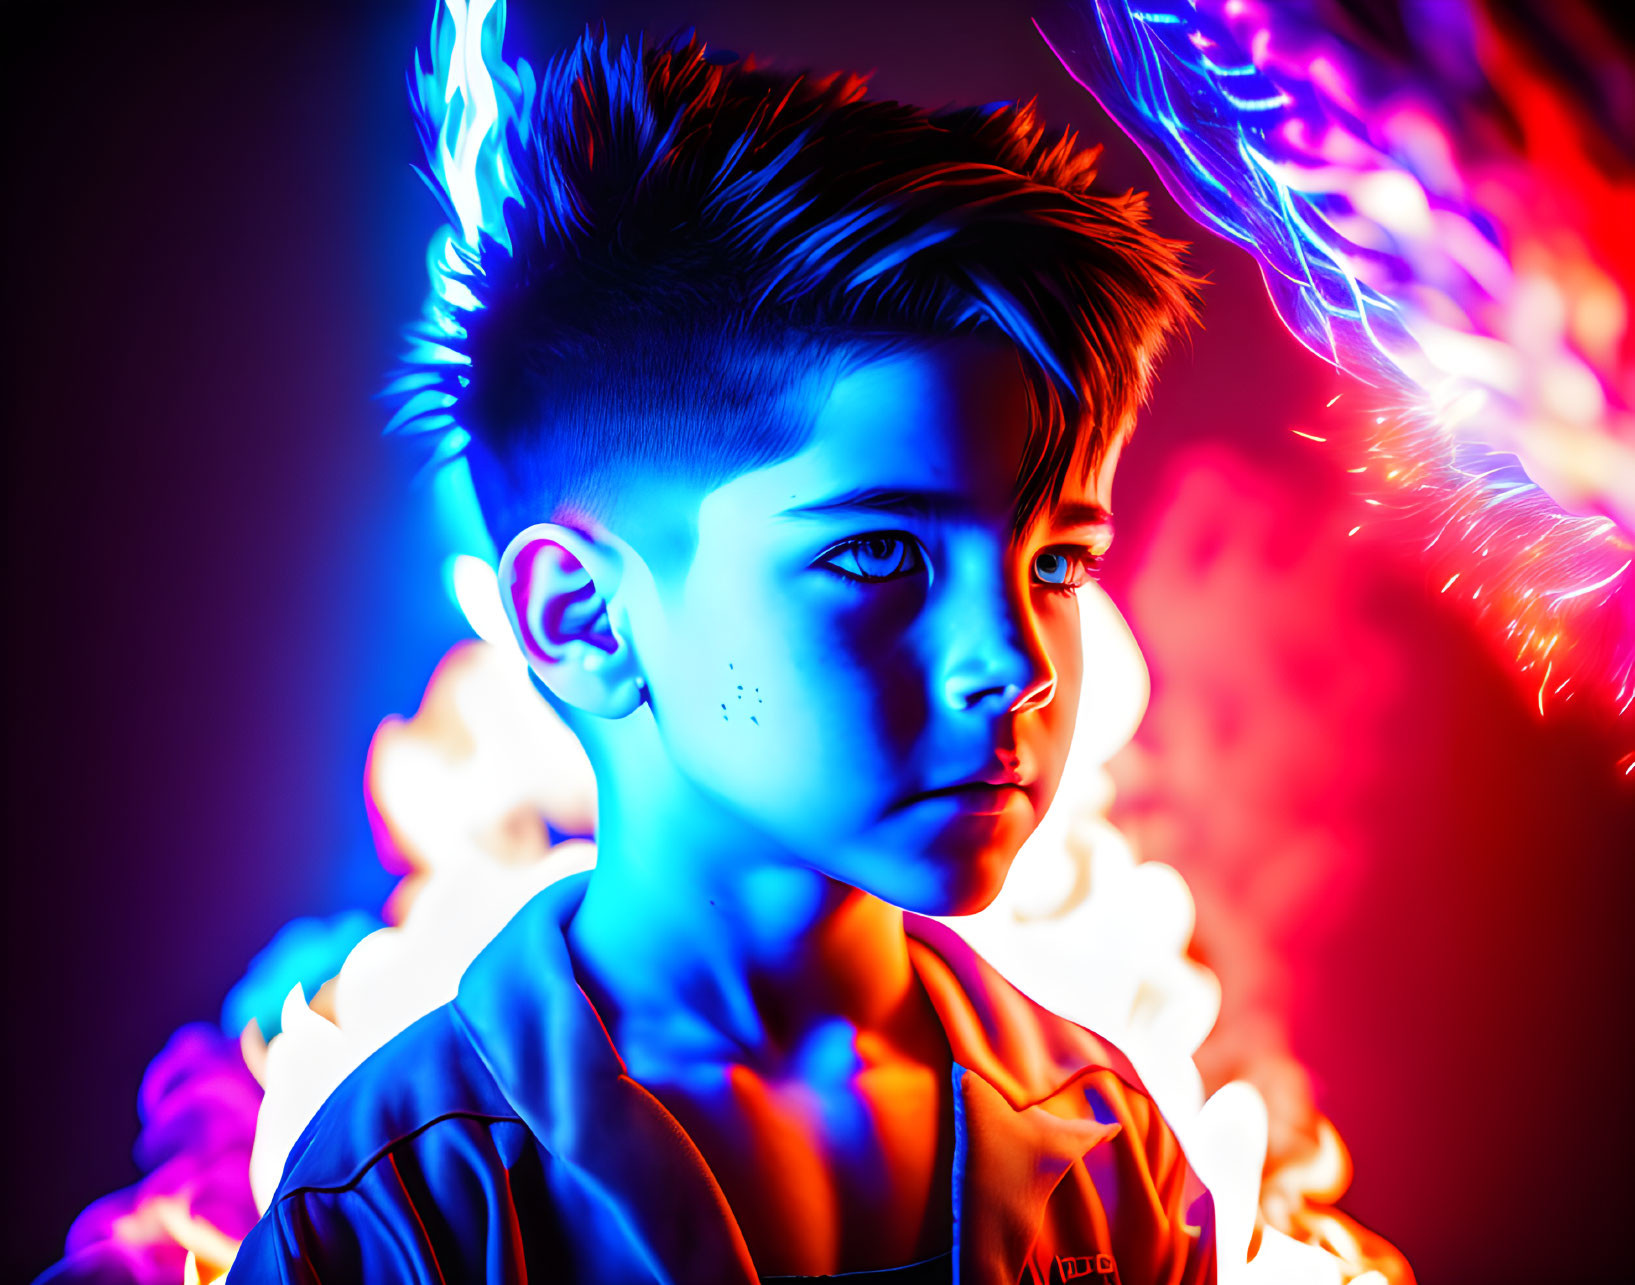 Portrait of a boy under vibrant blue and red neon lights